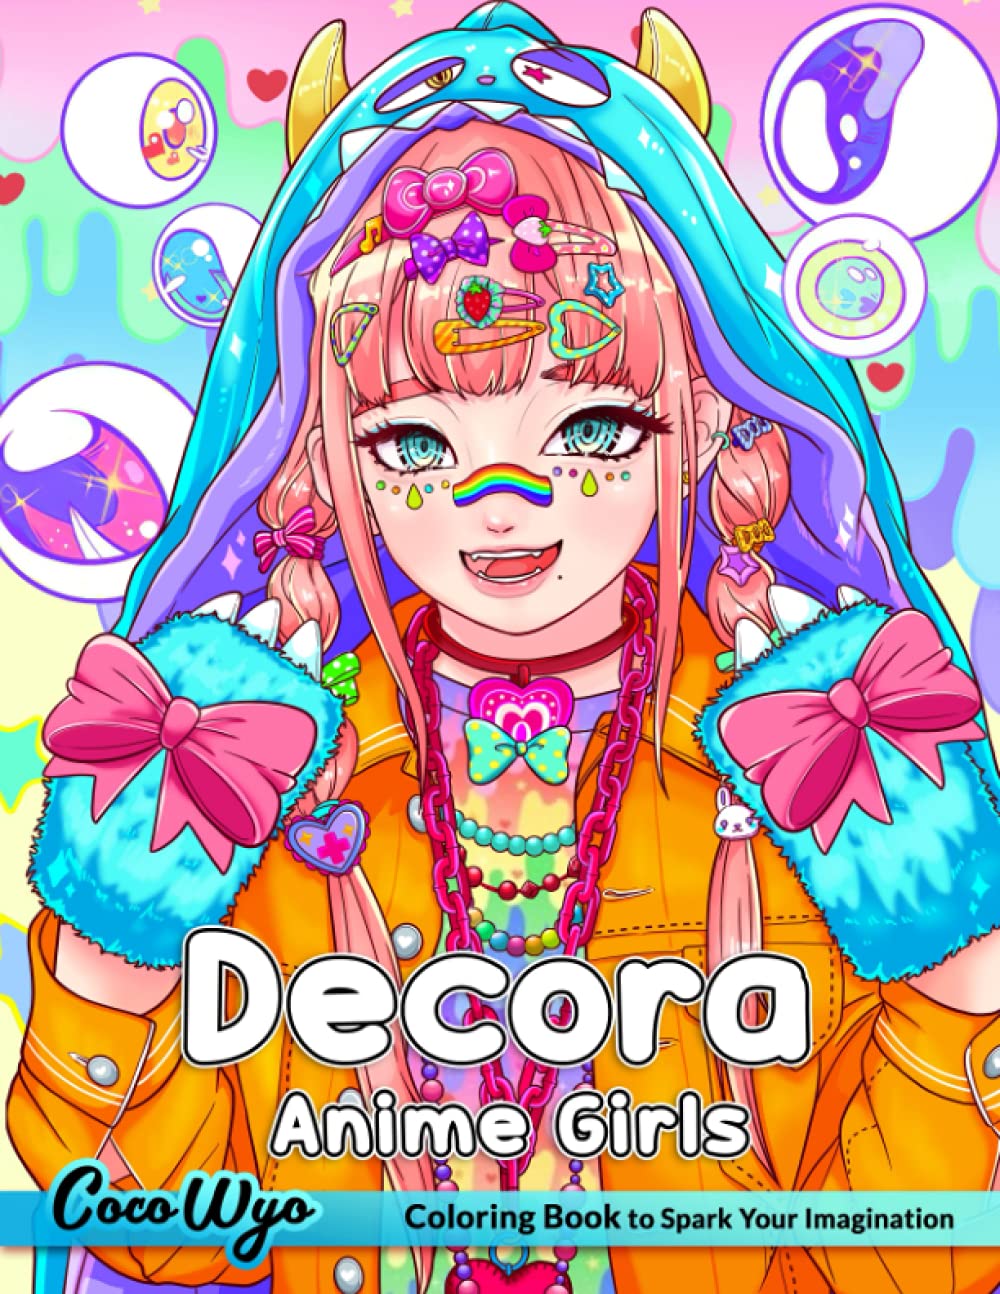 45 Anime Girl: Coloring Book with Cute Anime Girls - Fun Female Japanese  Cartoons and Relaxing Manga For Adults, Teens, Kids (Paperback)